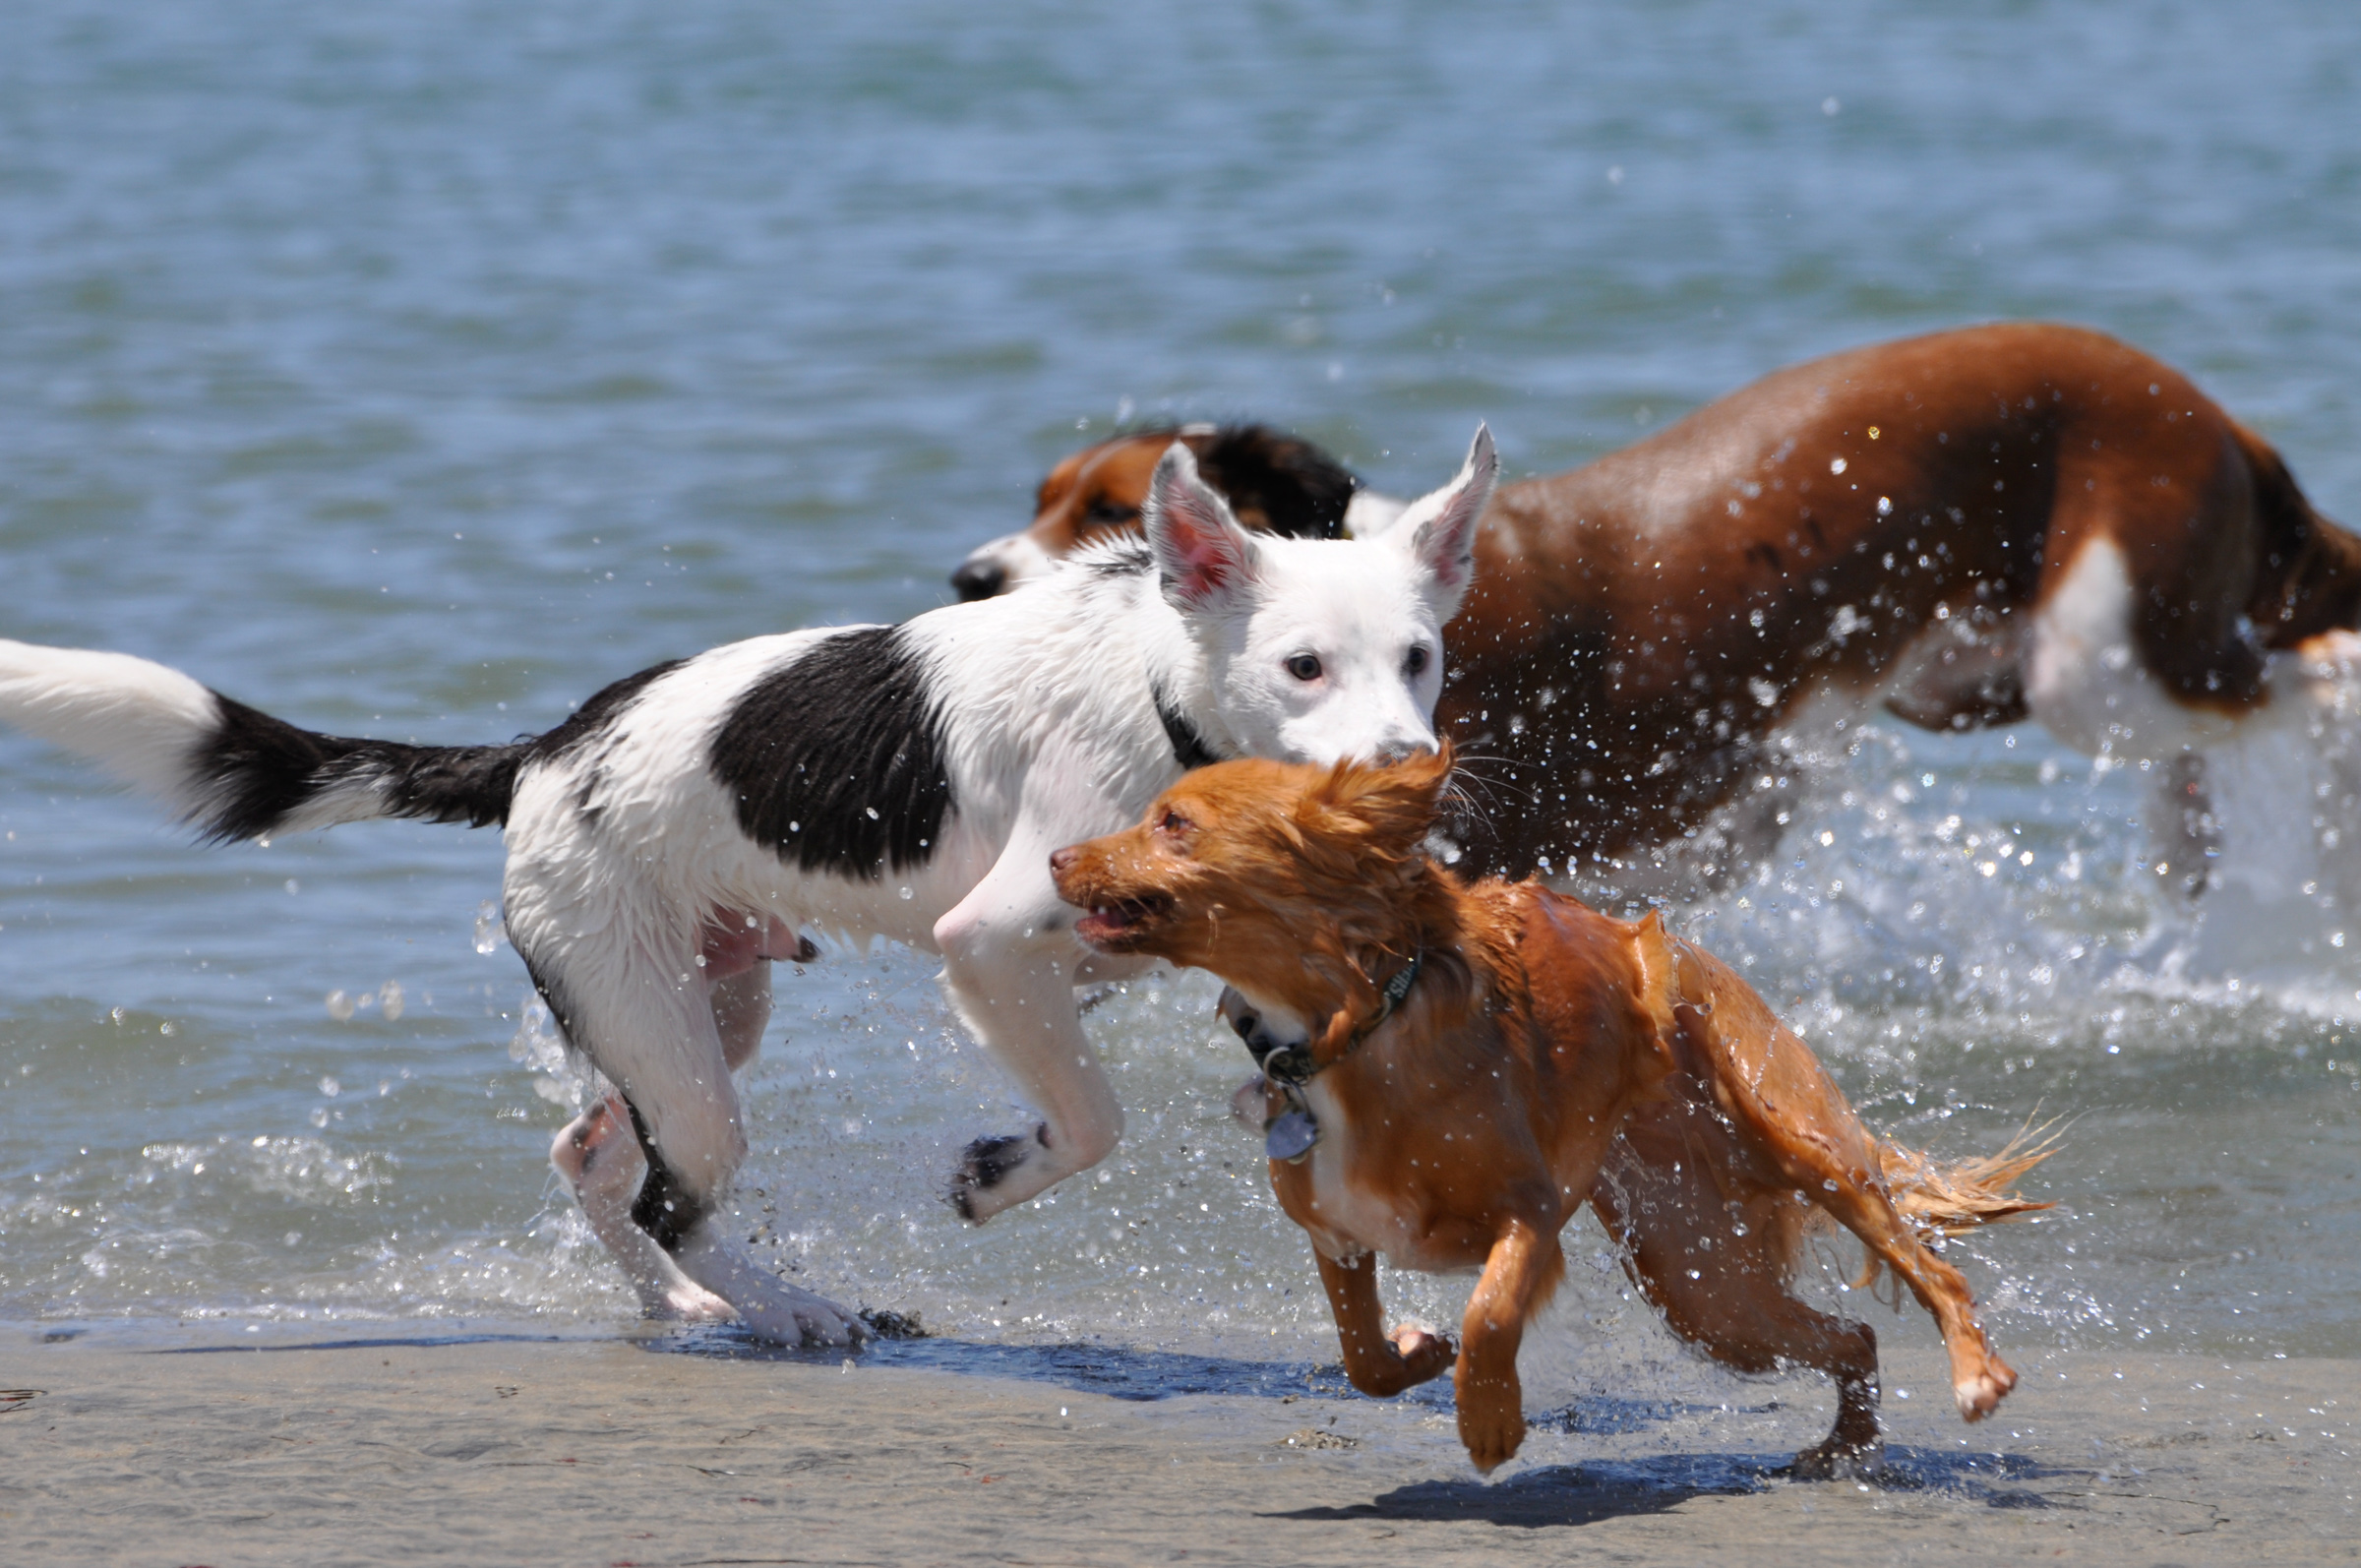 Three dogs of different sizes and colors chasing each other in the waves.